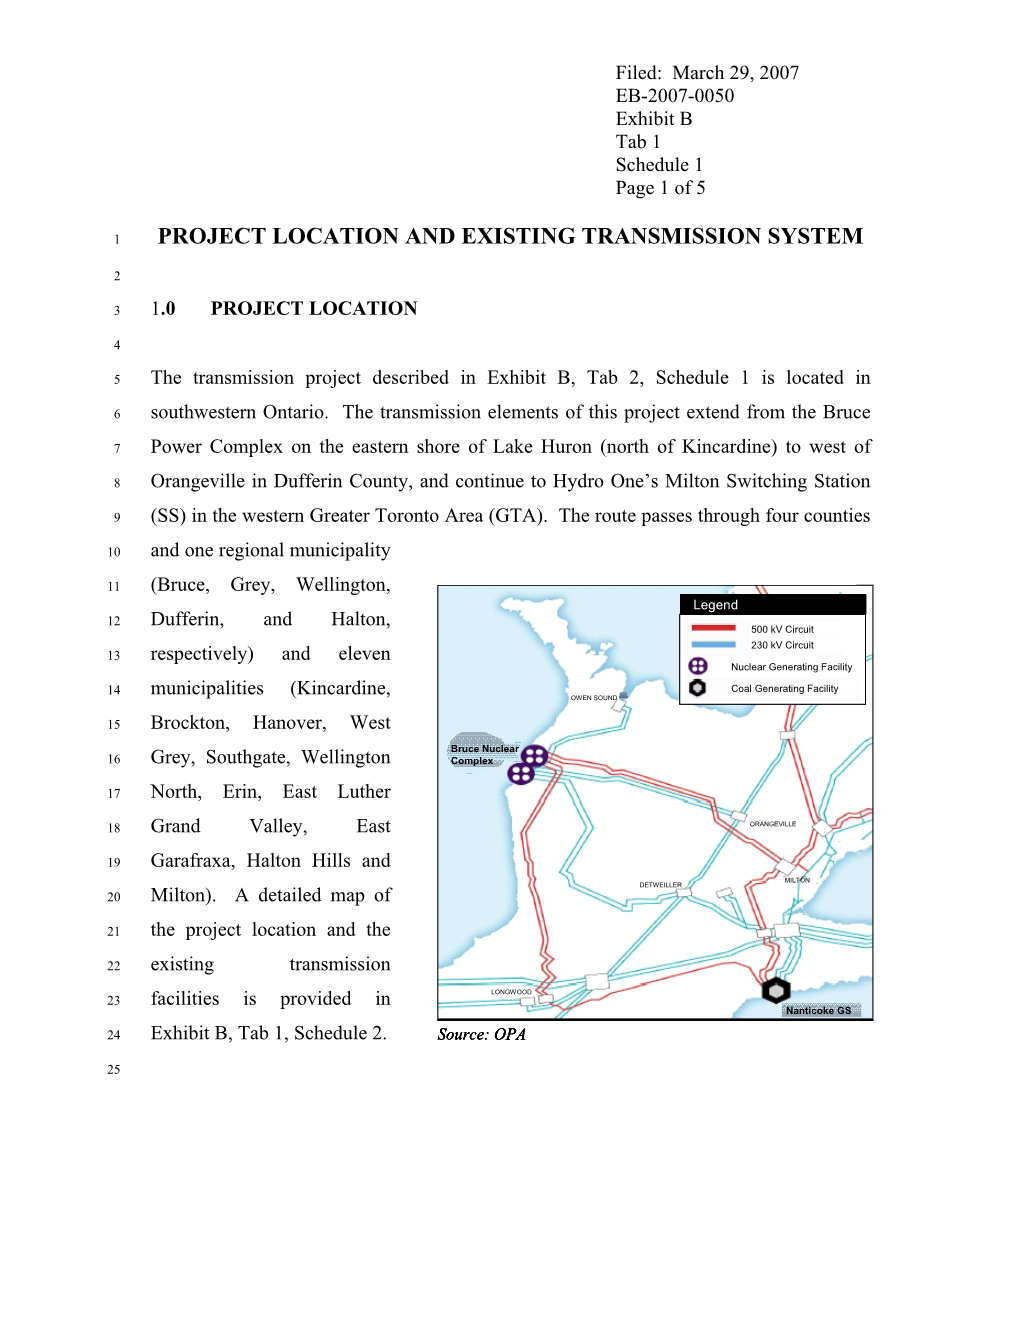 Project Location and Existing Transmission System